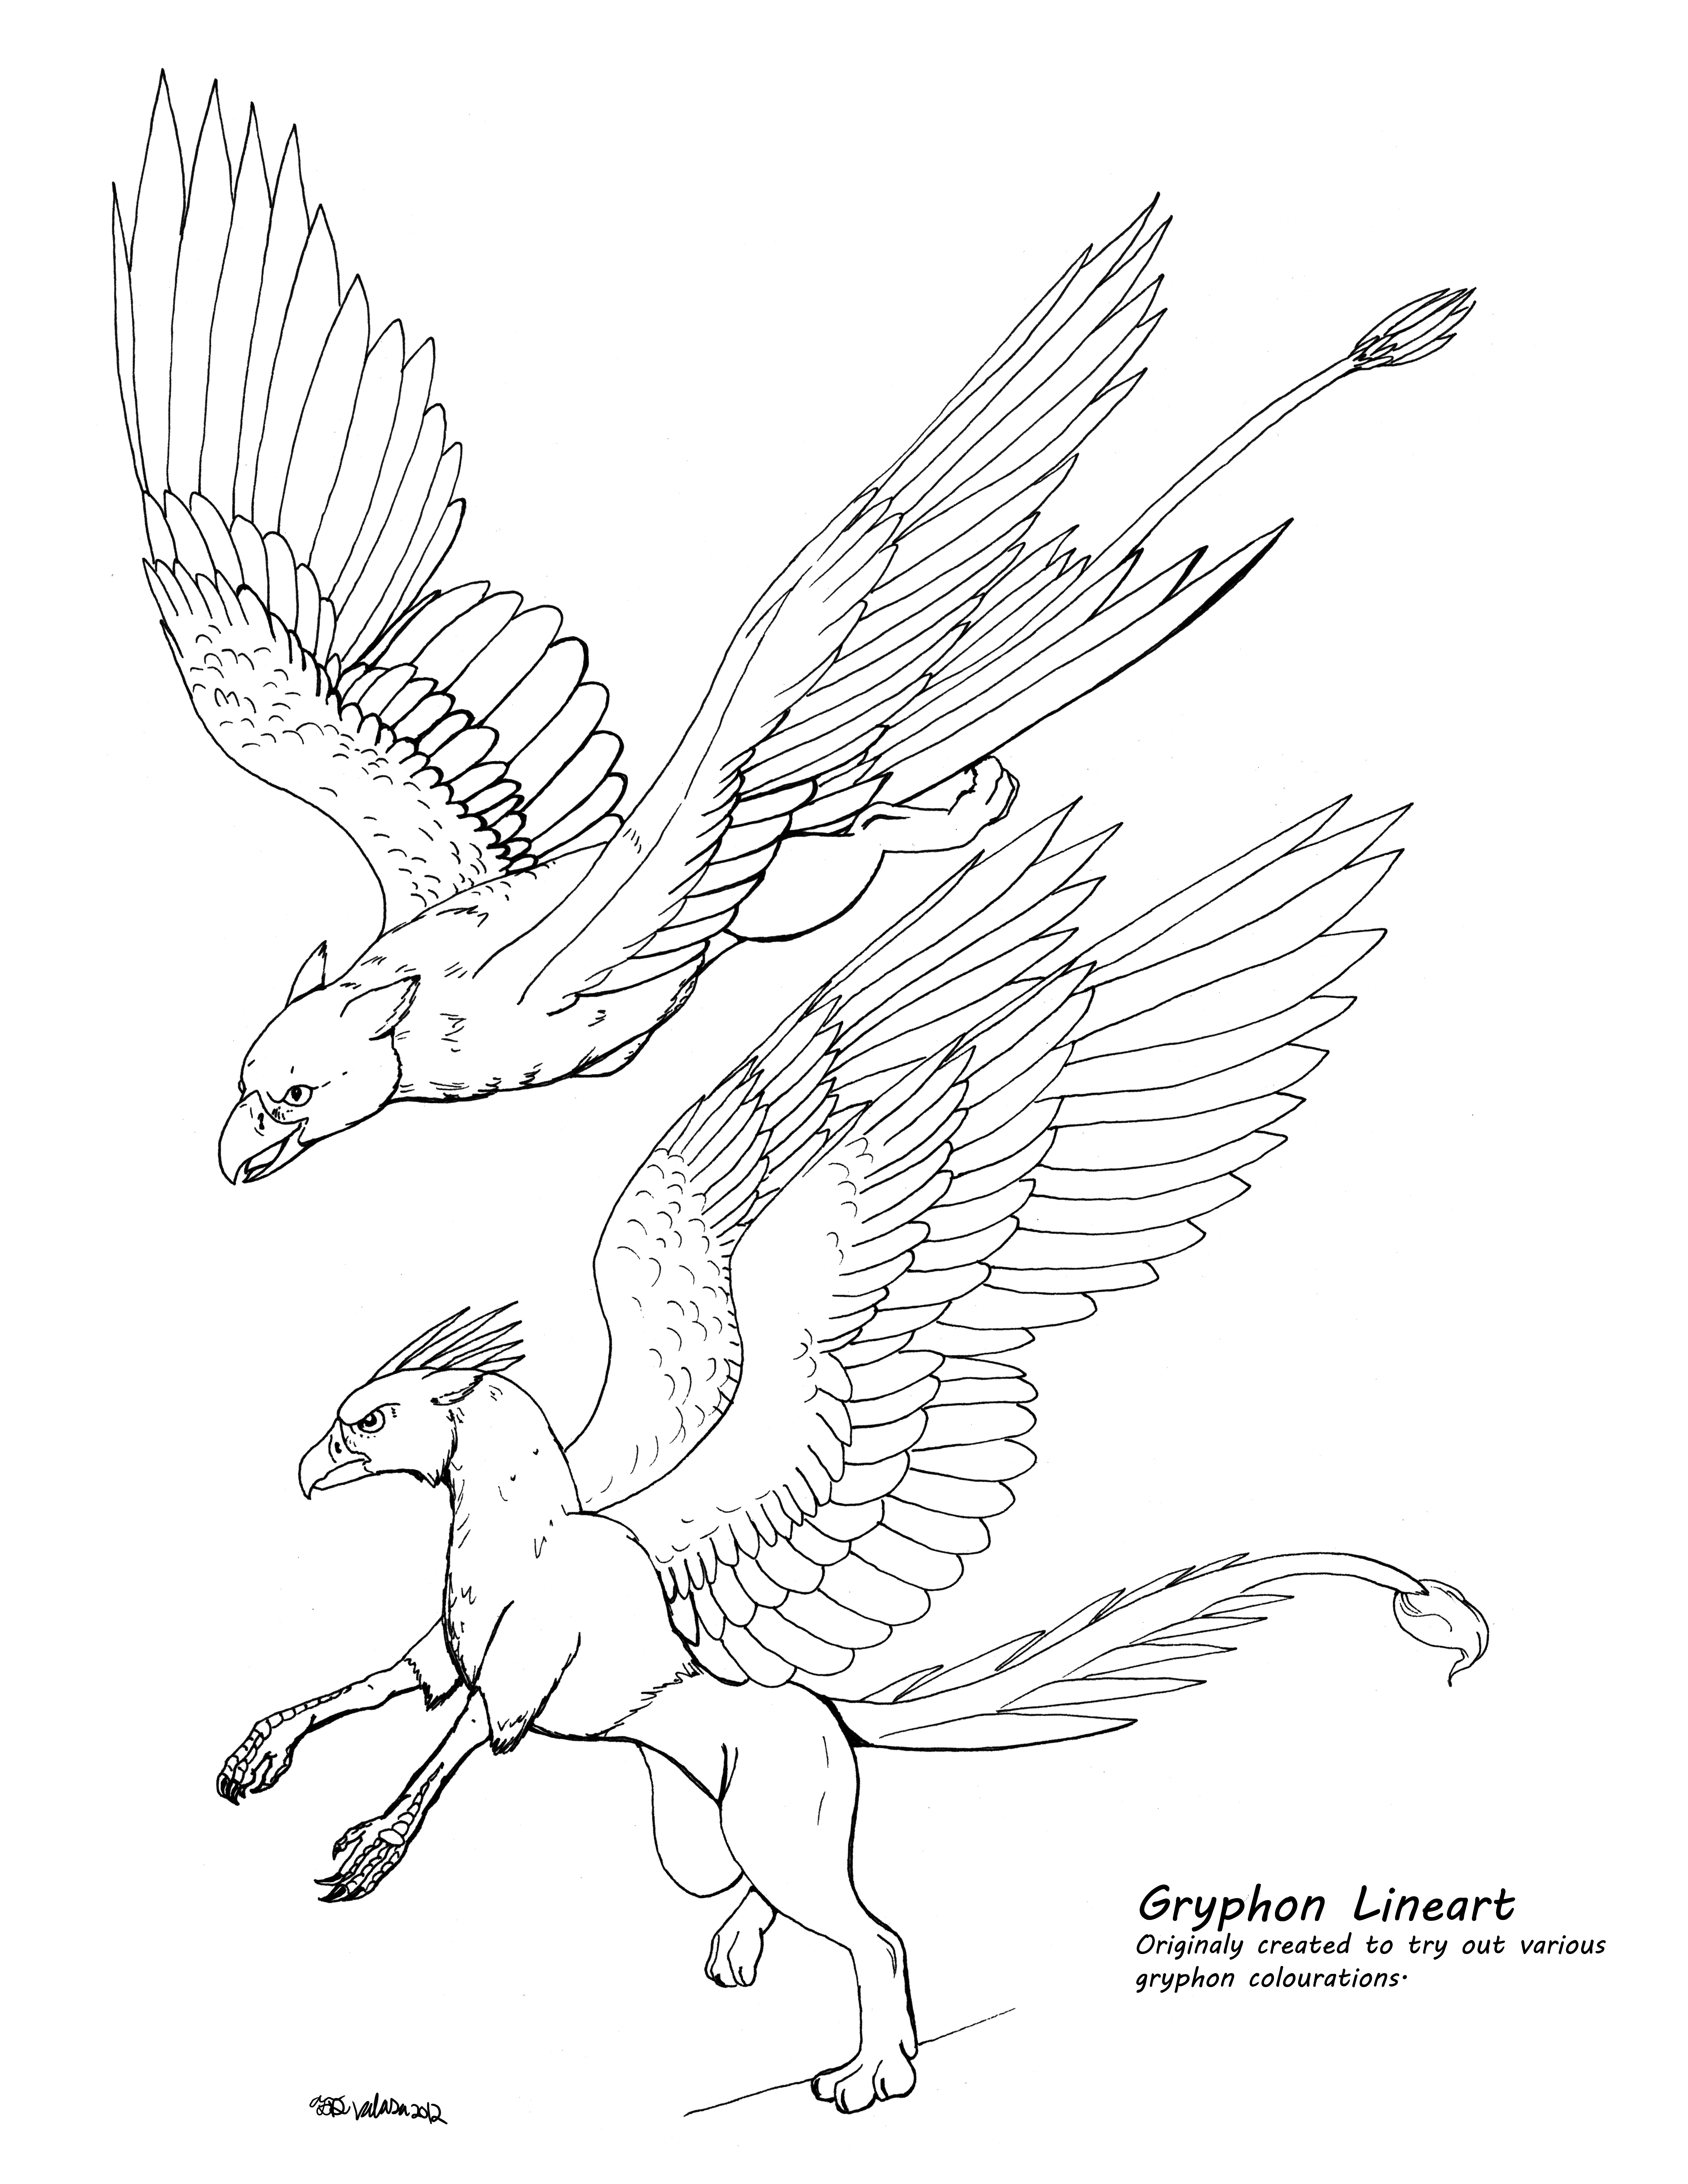 Two Gryphon lineart by Auronyth on DeviantArt